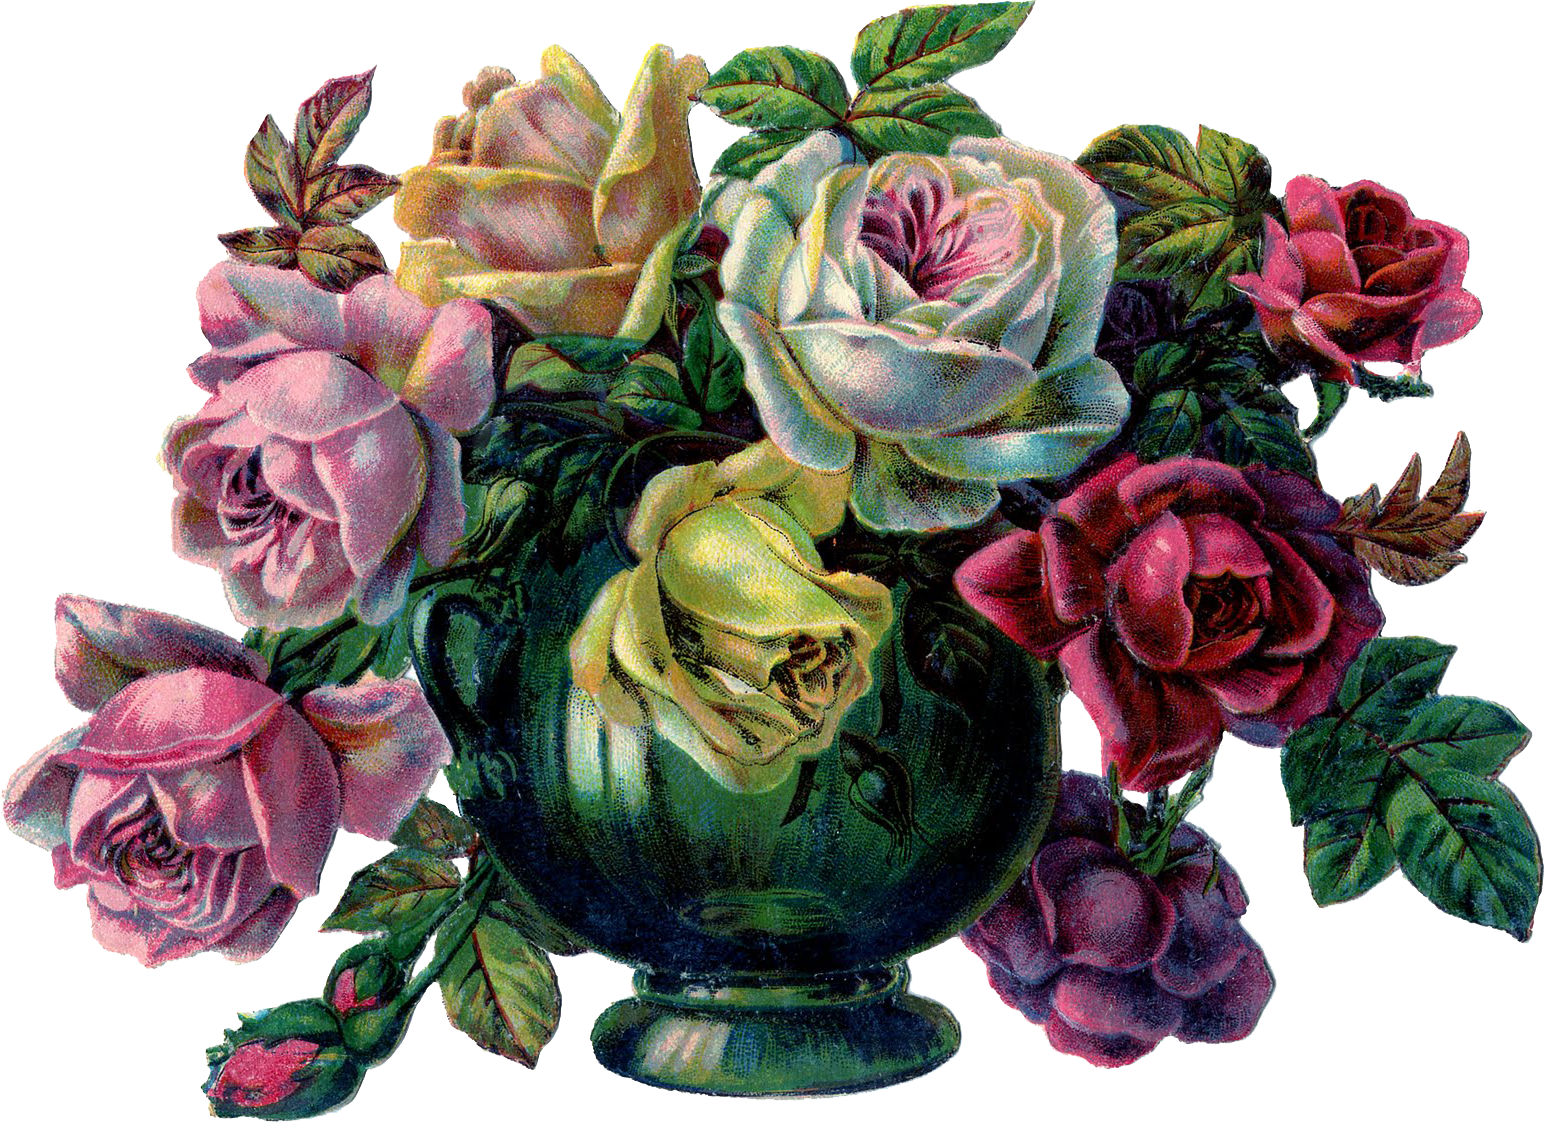 A Vase Of Flowers With Leaves